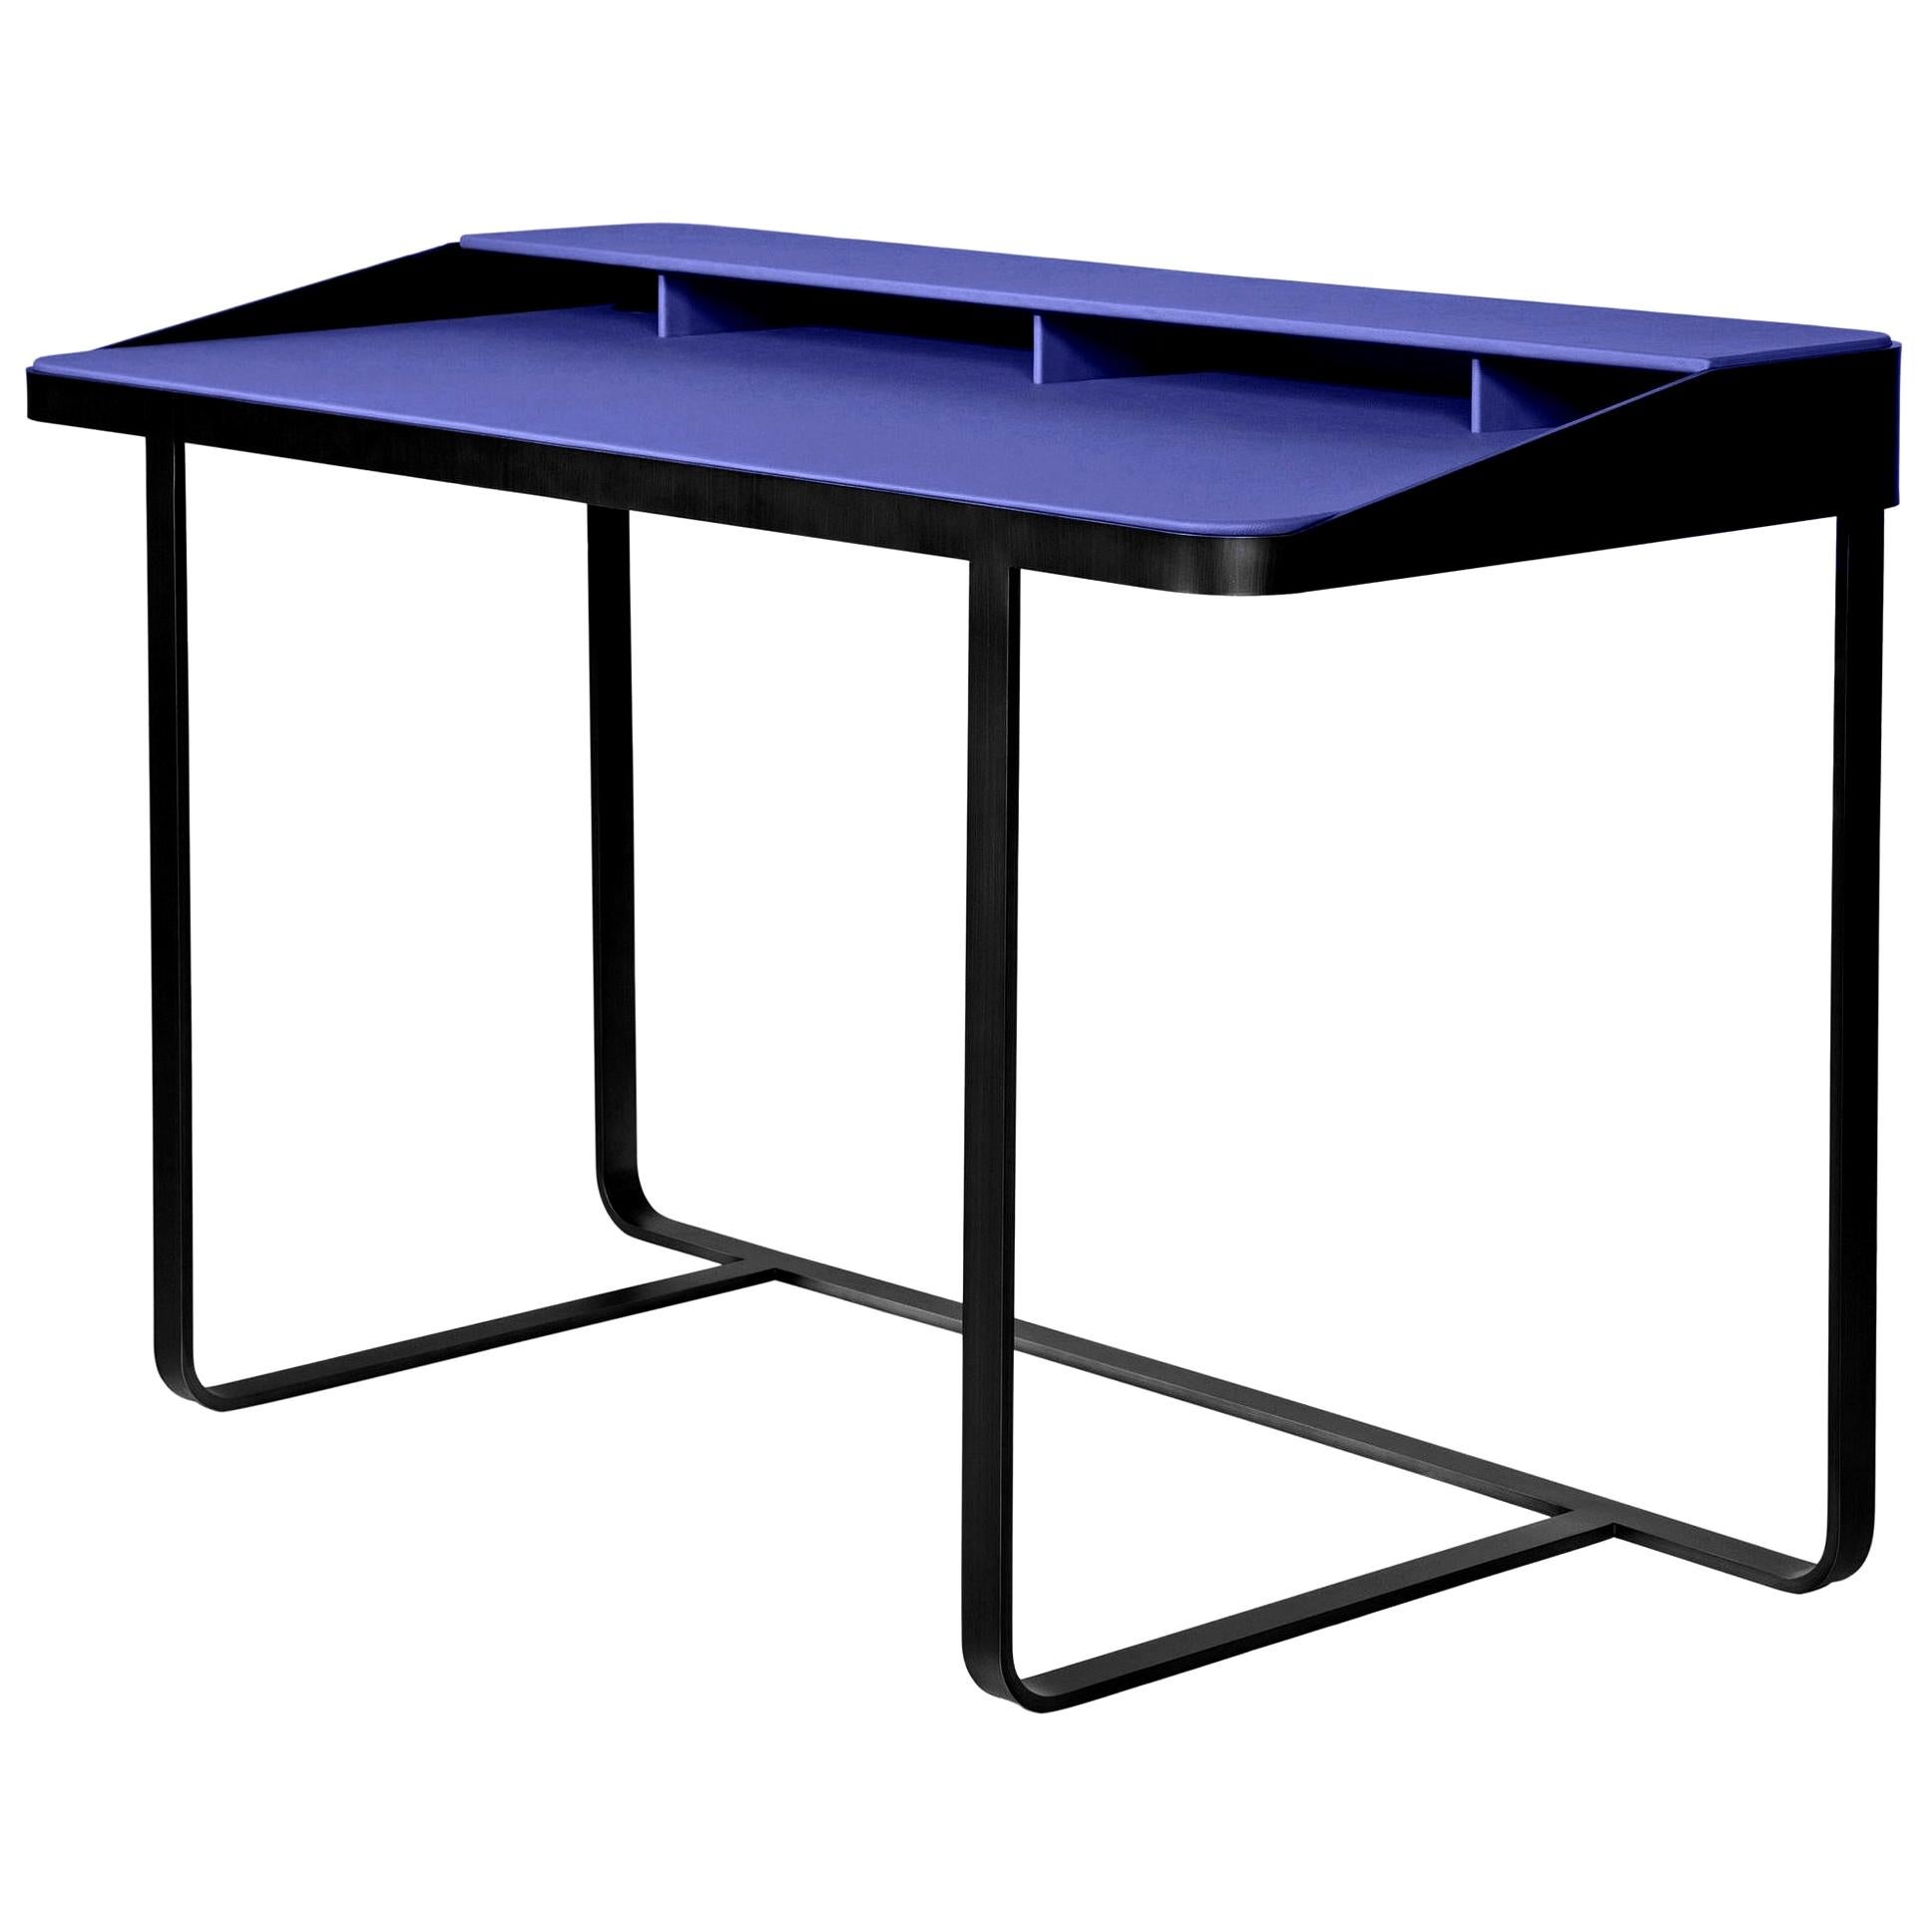 Twain Blue Leather Desk, Designed by Gordon Guillaumier, Made in Italy For Sale